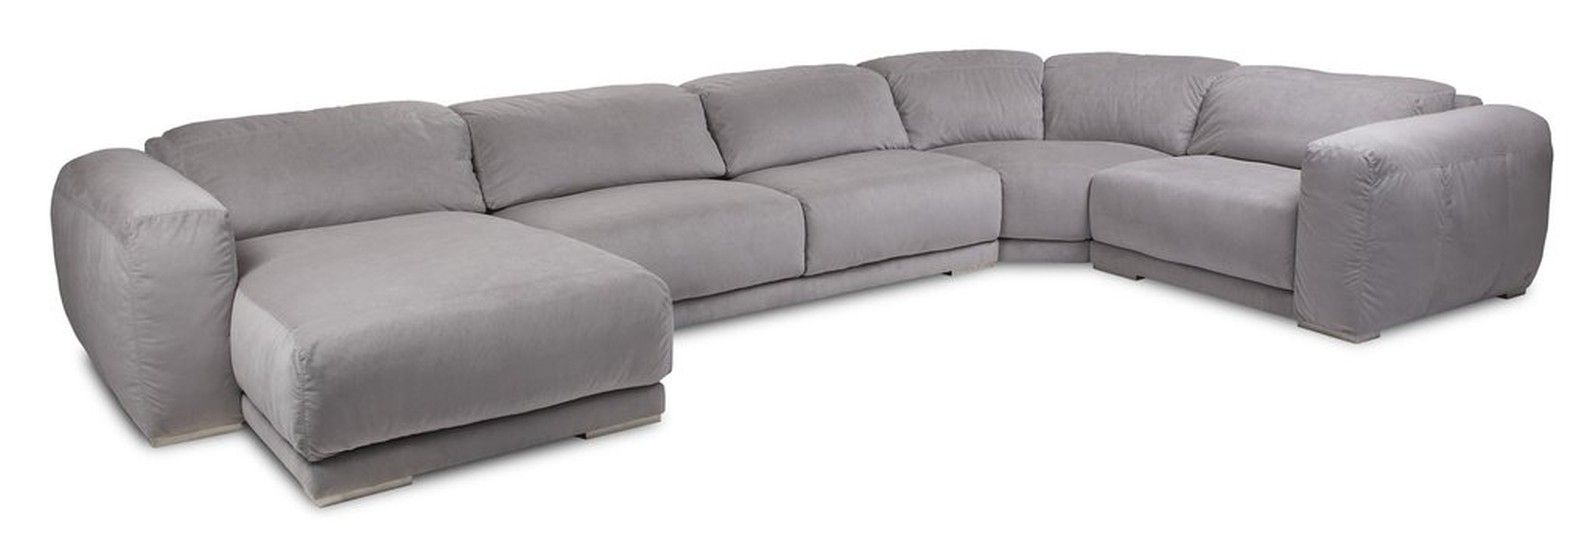 Sectional Sofa (View 8 of 10)